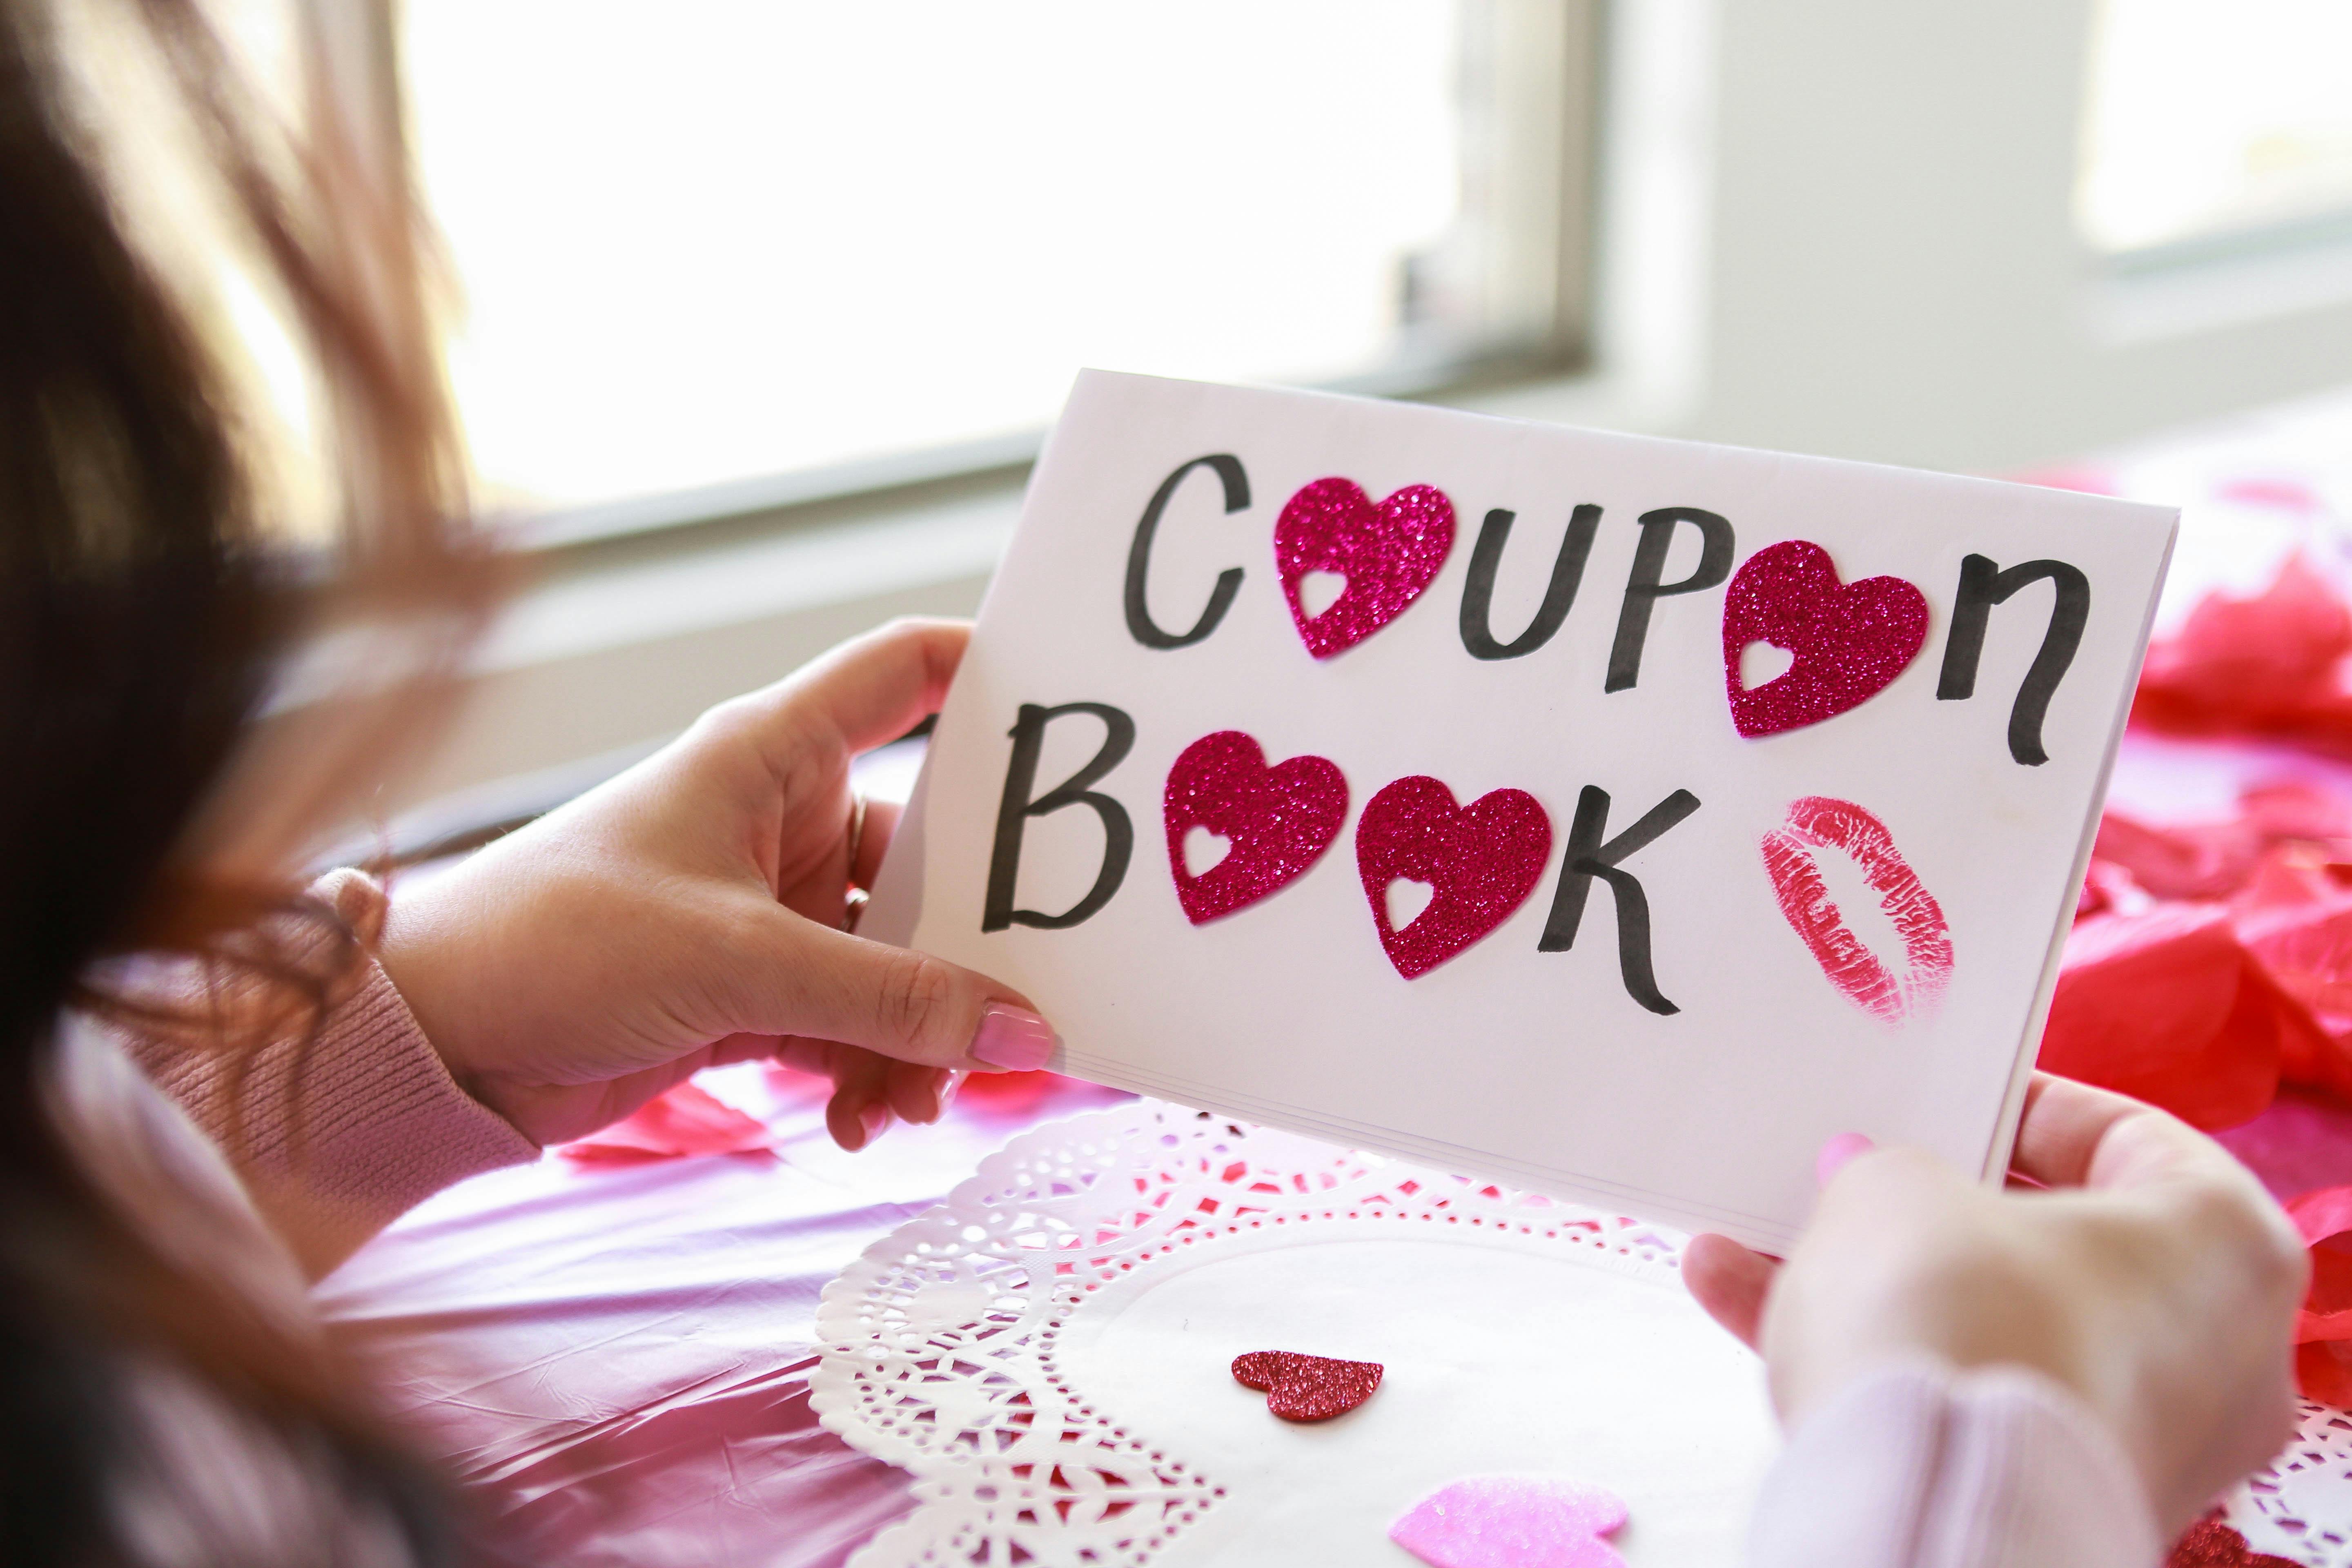 101 Free Love Coupons for Him and Her To Use Any Time pic